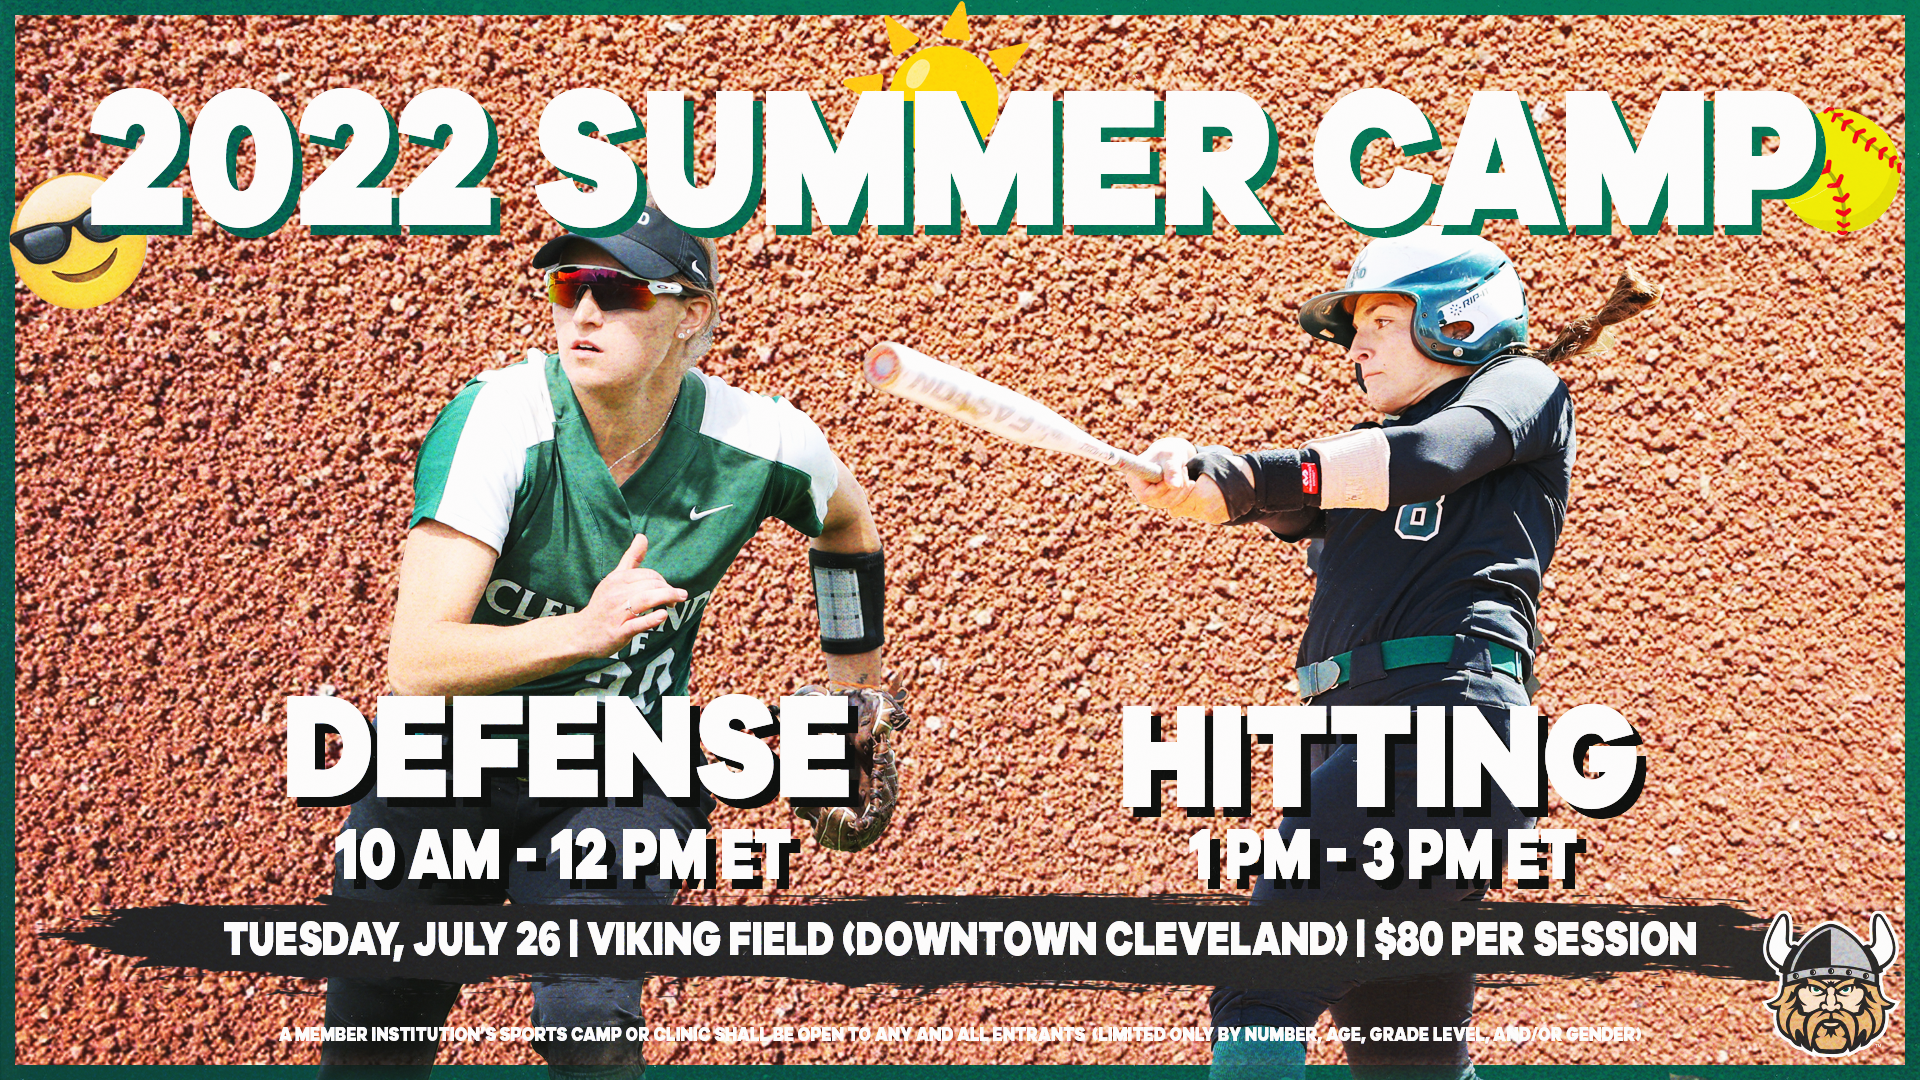 Spaces filling up fast for the 2022 CSU Softball Summer Camp